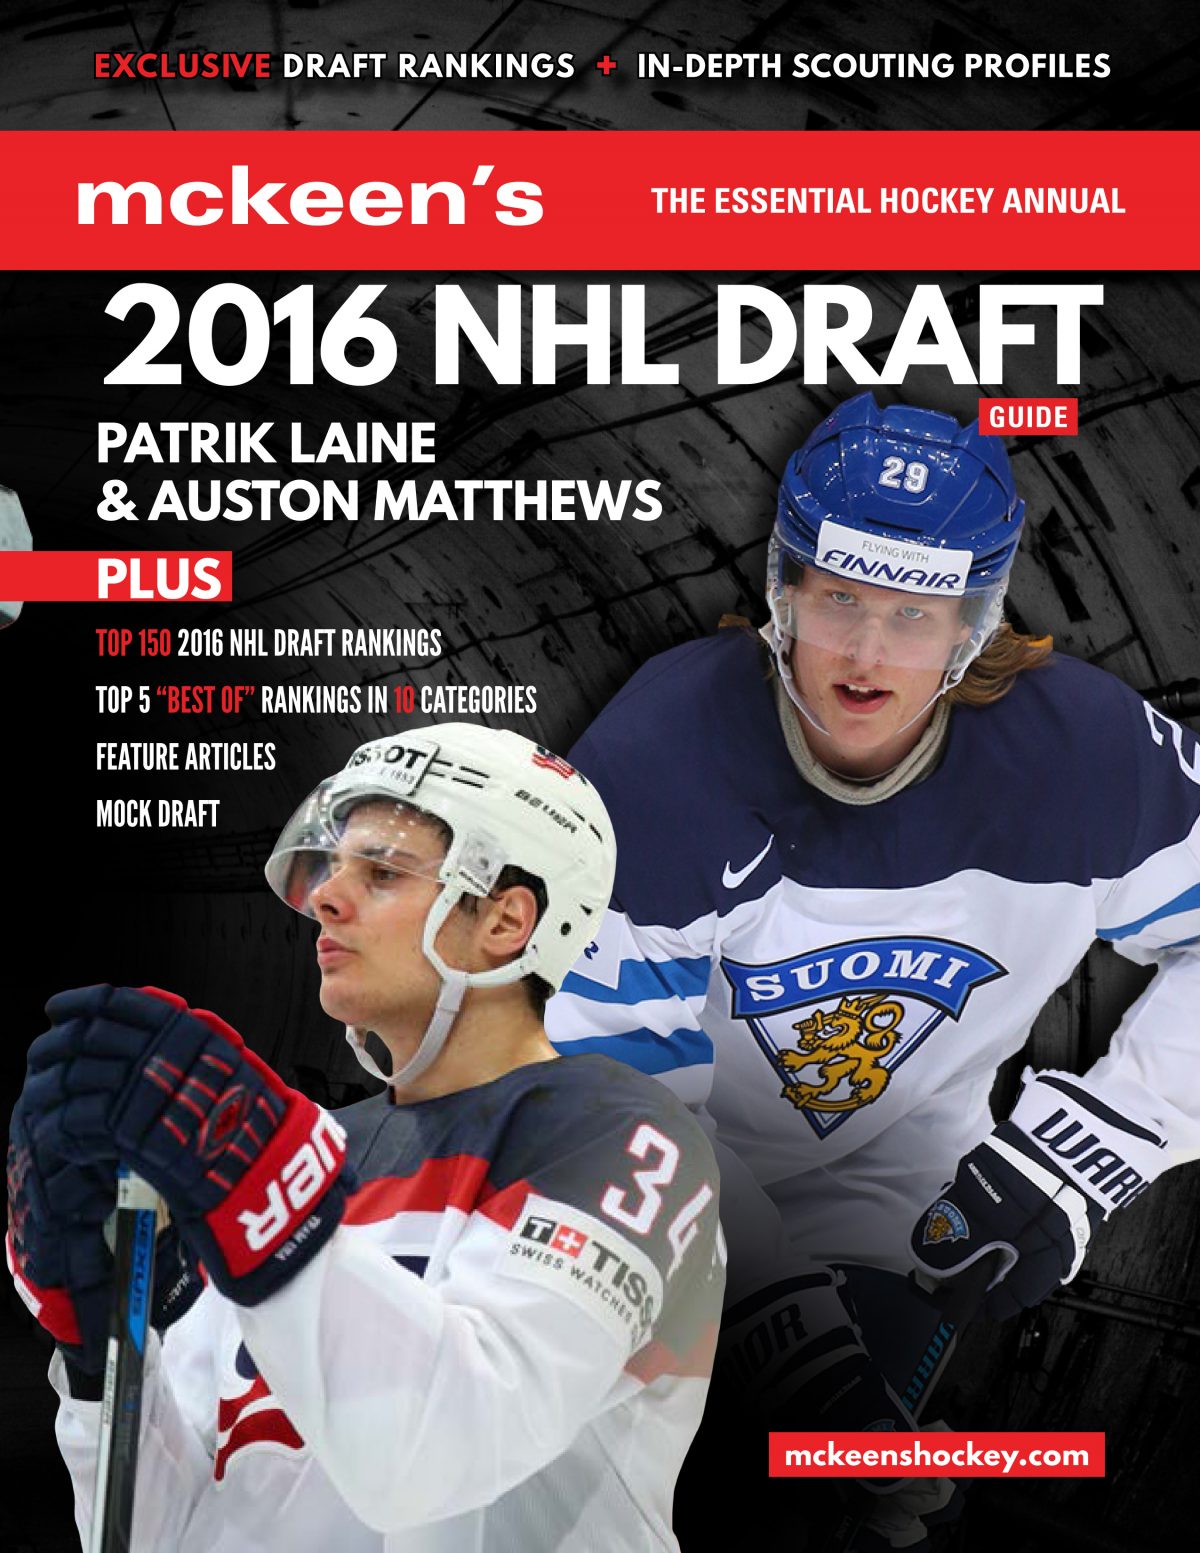 McKeen's 2016 NHL Draft Guide now 